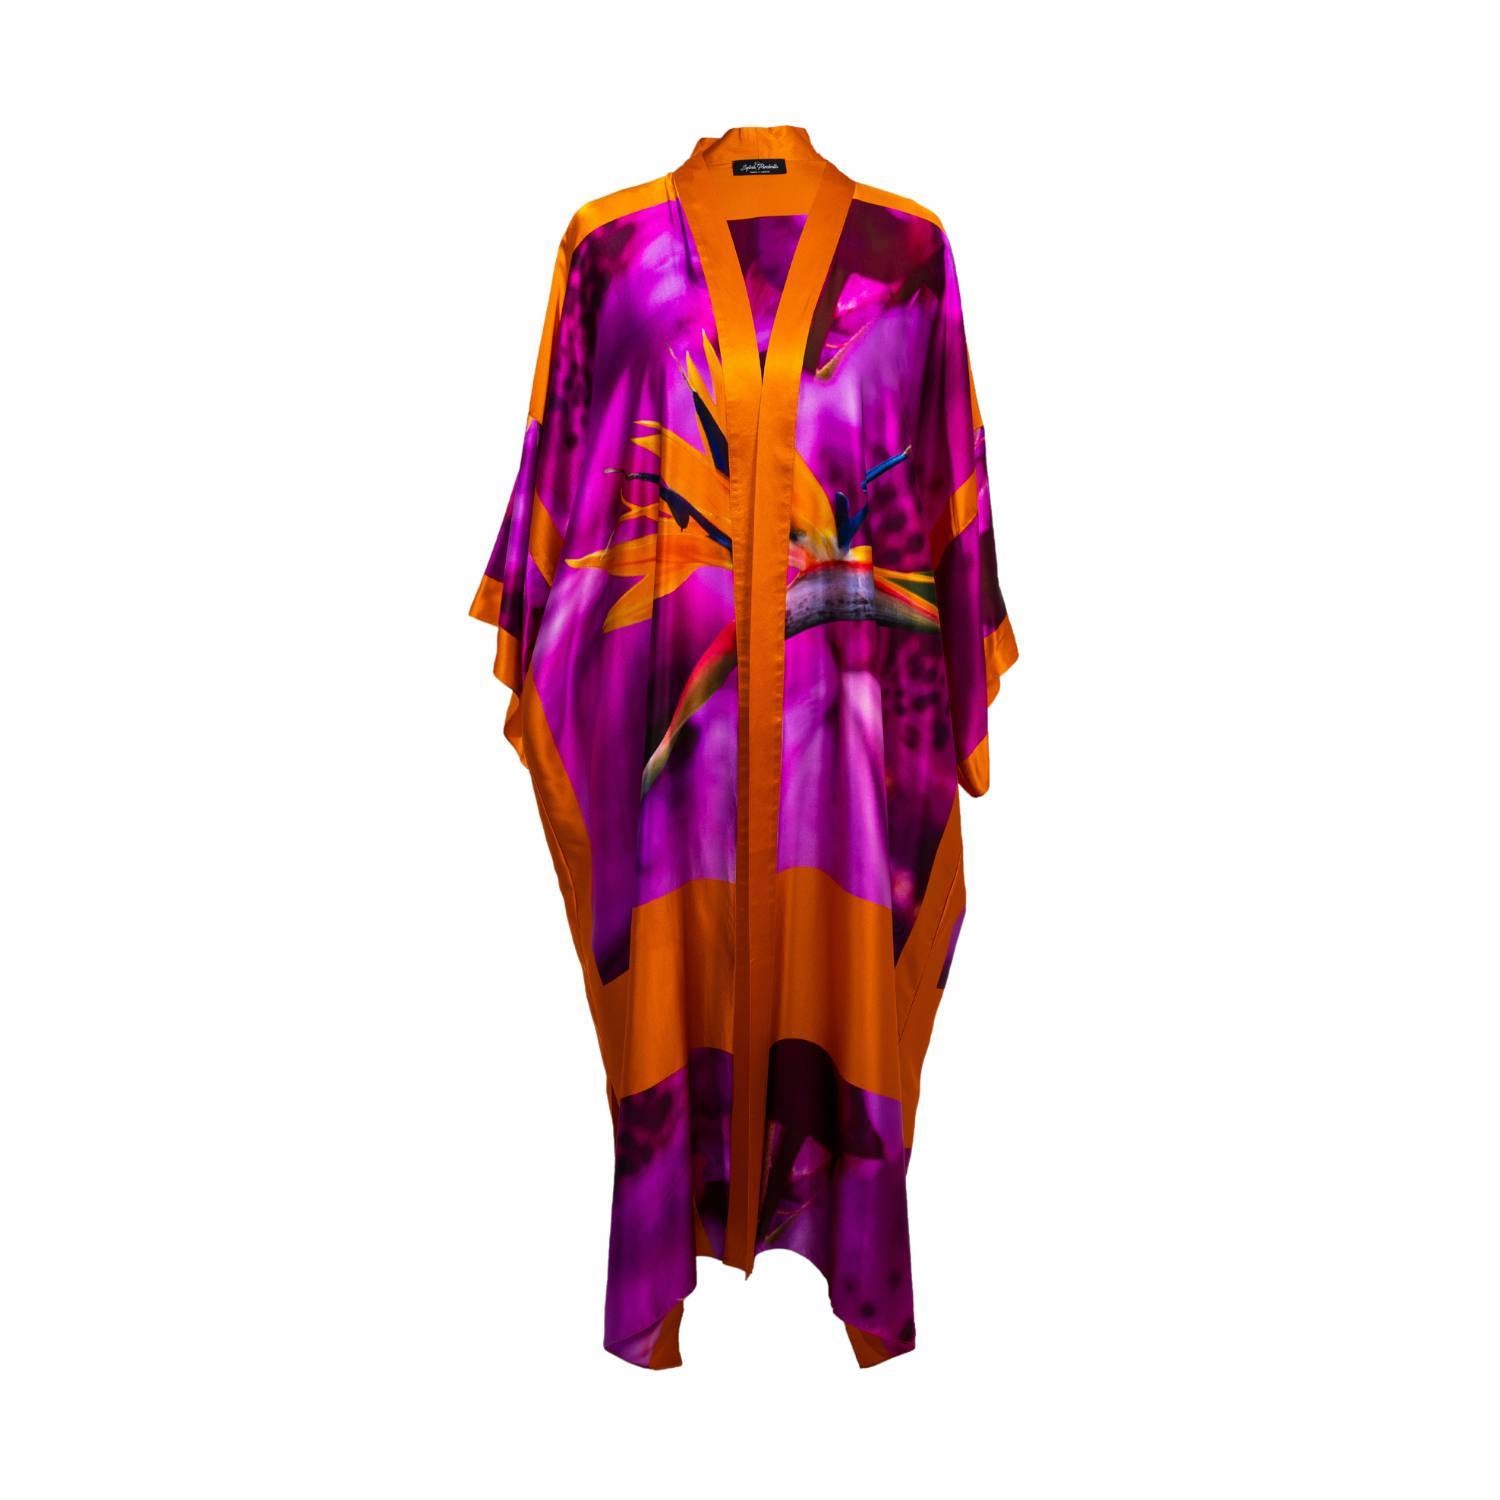 Women's Bird of Paradise Pink Purple Plus Size and Mid Size Silk Kimono displayed in a cutout image, highlighting its vibrant design and details.